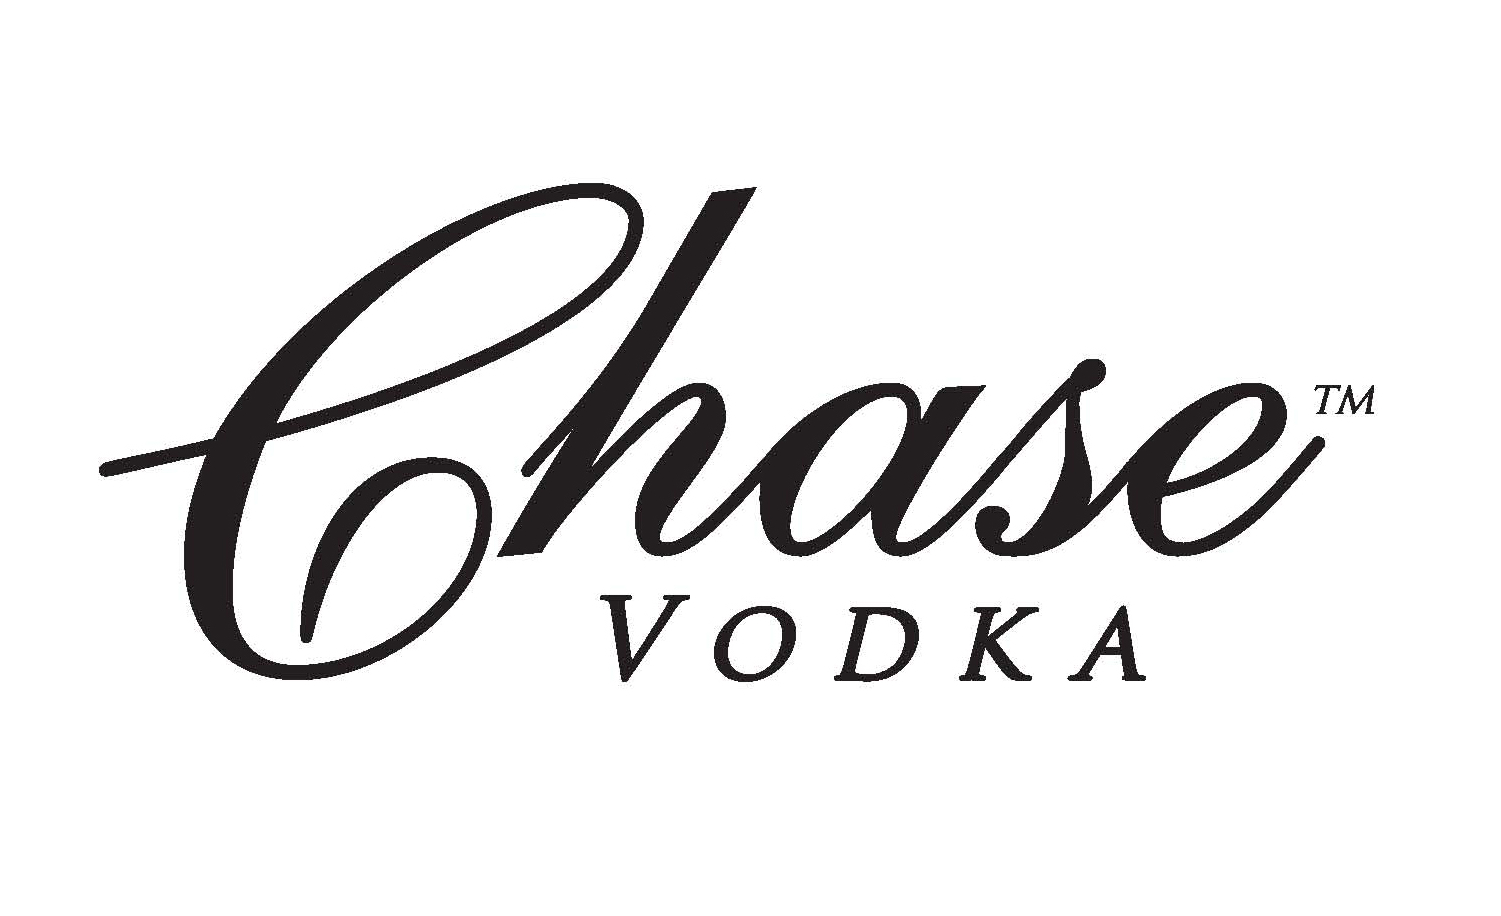 Chase Distillery